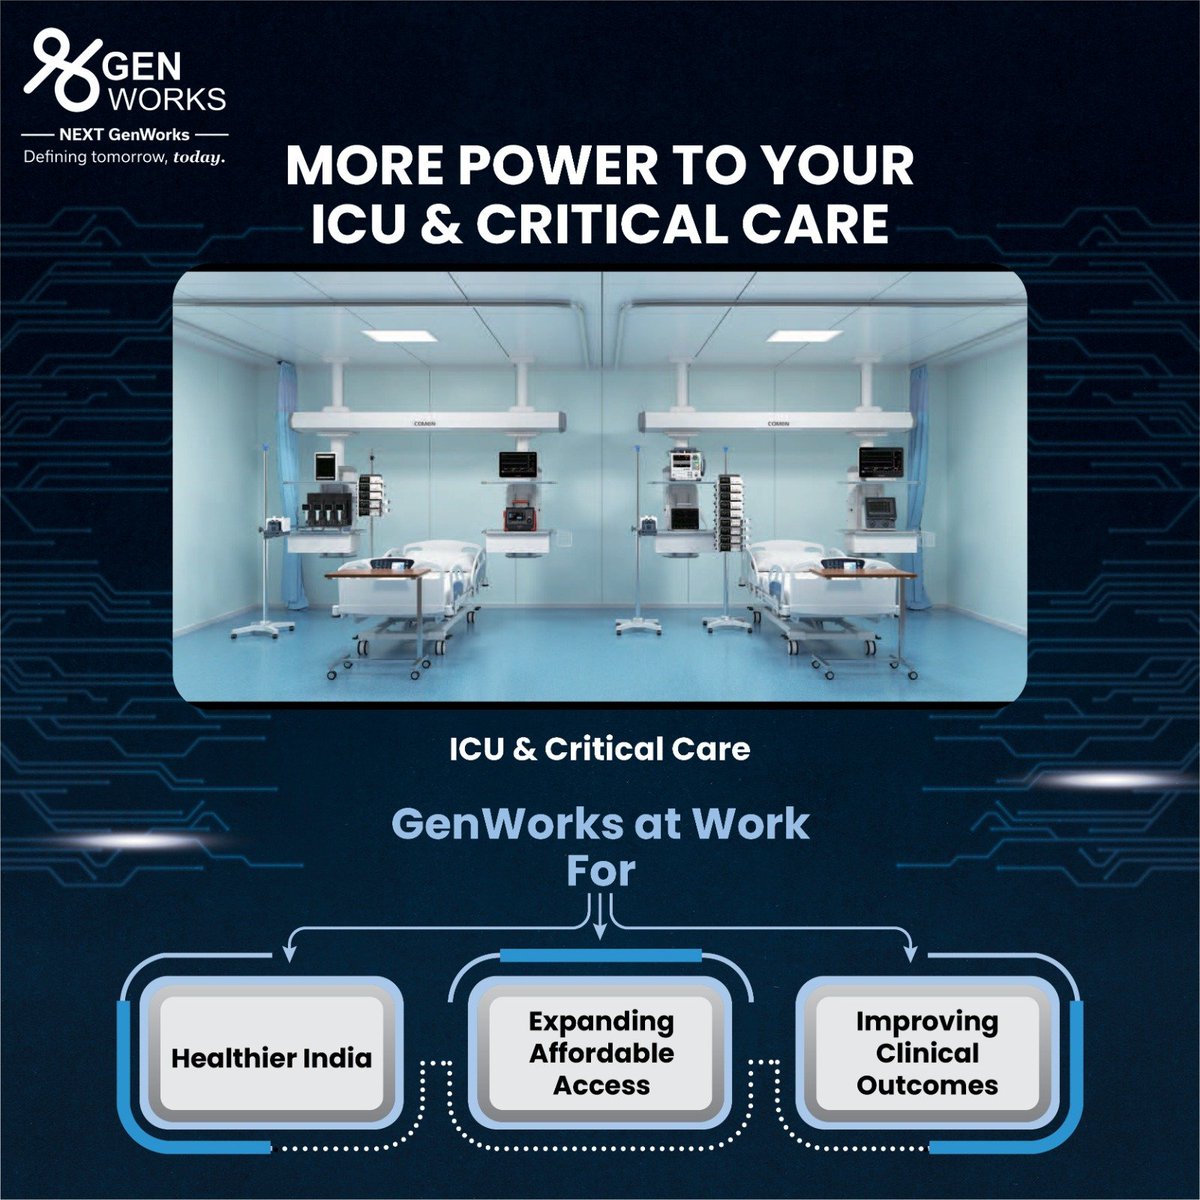 Revolutionizing ICU and critical care with cutting-edge medical solutions that can empower healthcare professionals and patient outcomes in emergency situations.
#GenWorks #GenWorksHealth #EmpoweringCriticalCare #InnovatingHealthcare